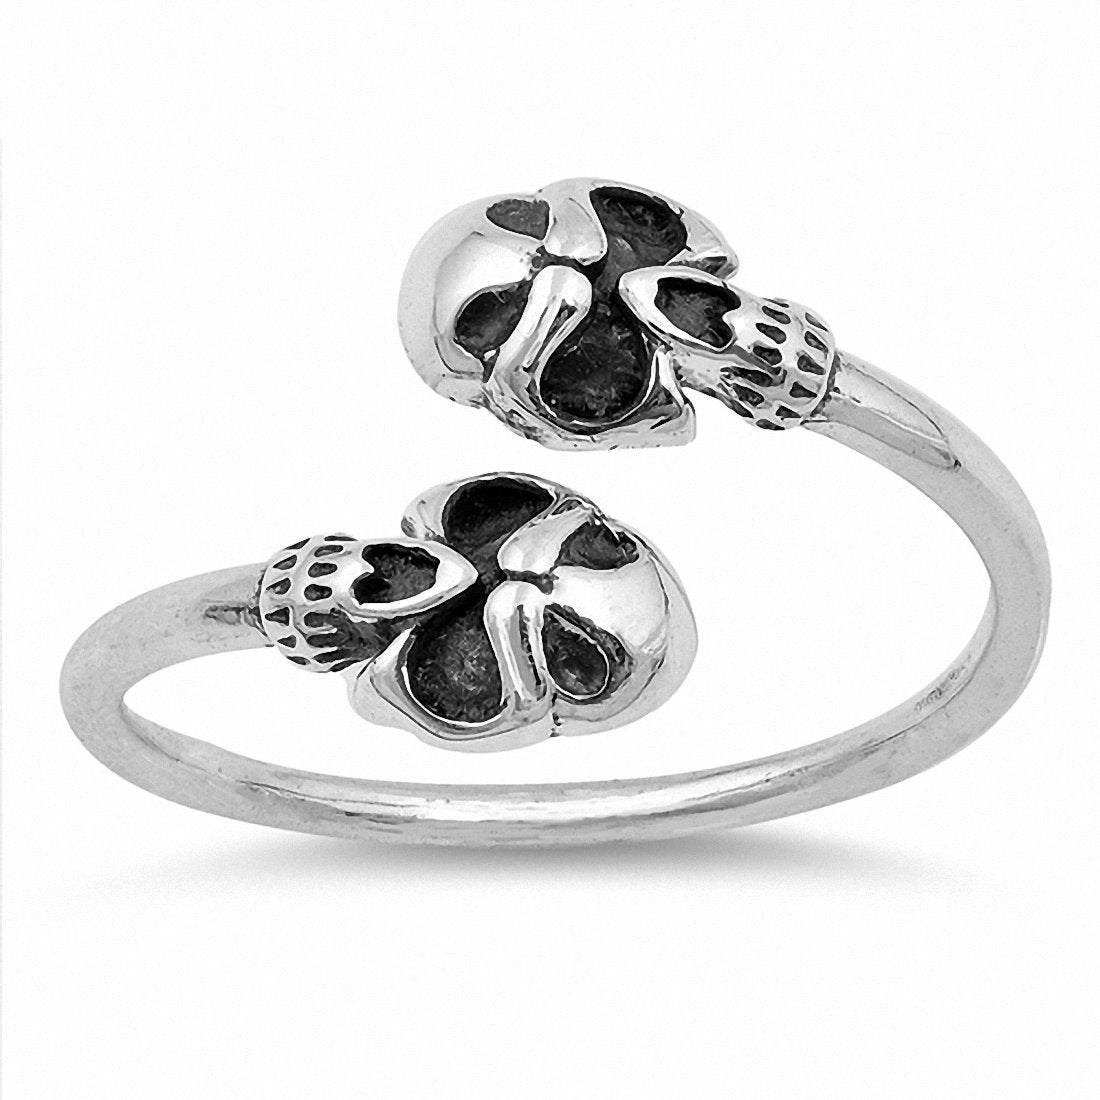 Wraparound Skulls Band Ring 925 Sterling Silver Bypass Wrap